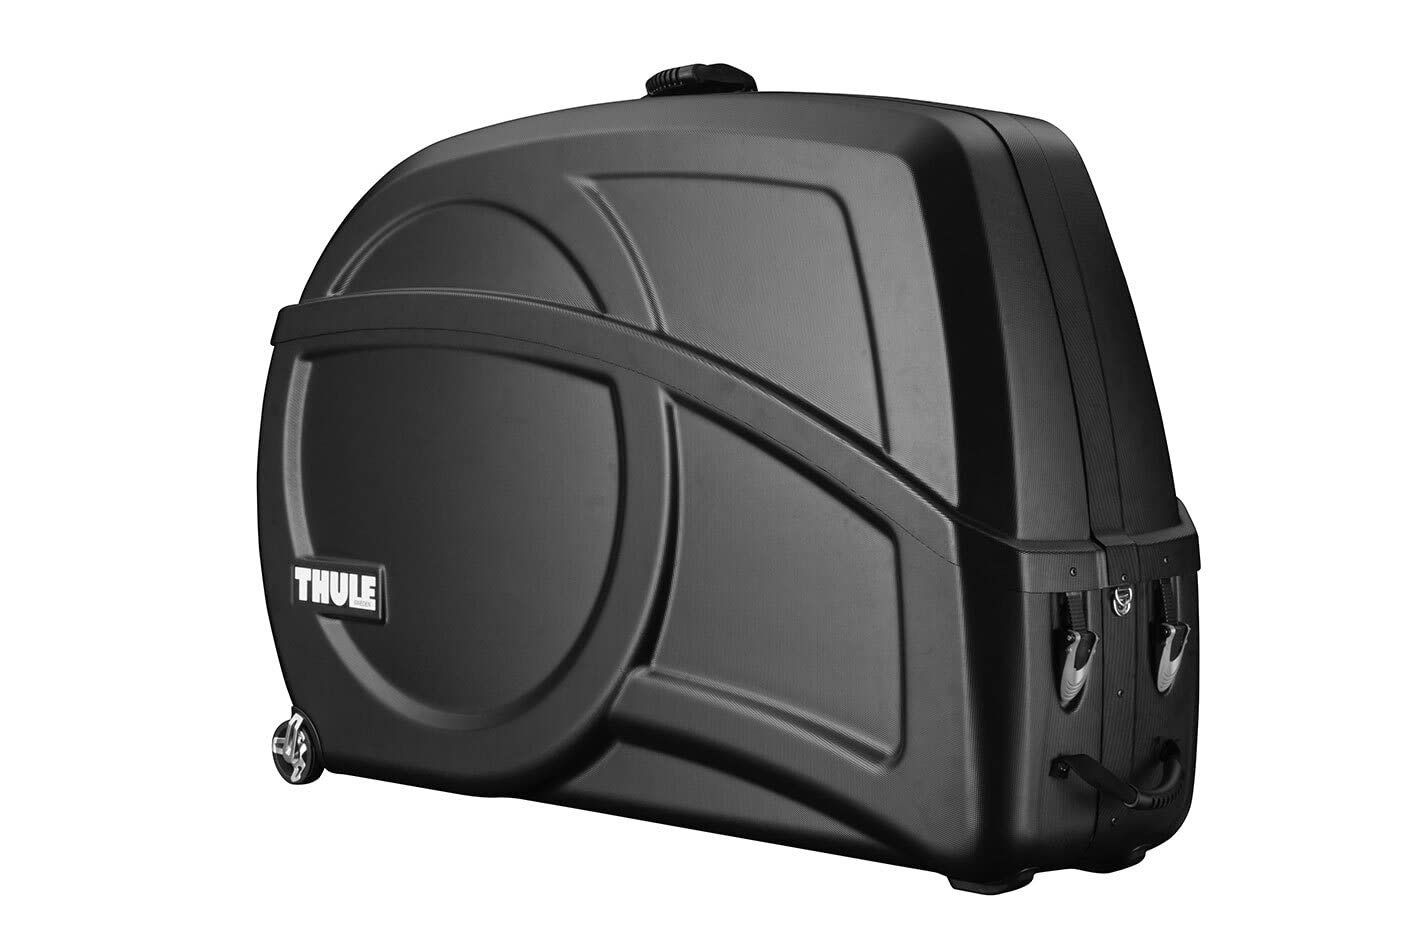 Thule RoundTrip Transition – Hard Shell Bike Travel Case with Built-in Repair Stand 6